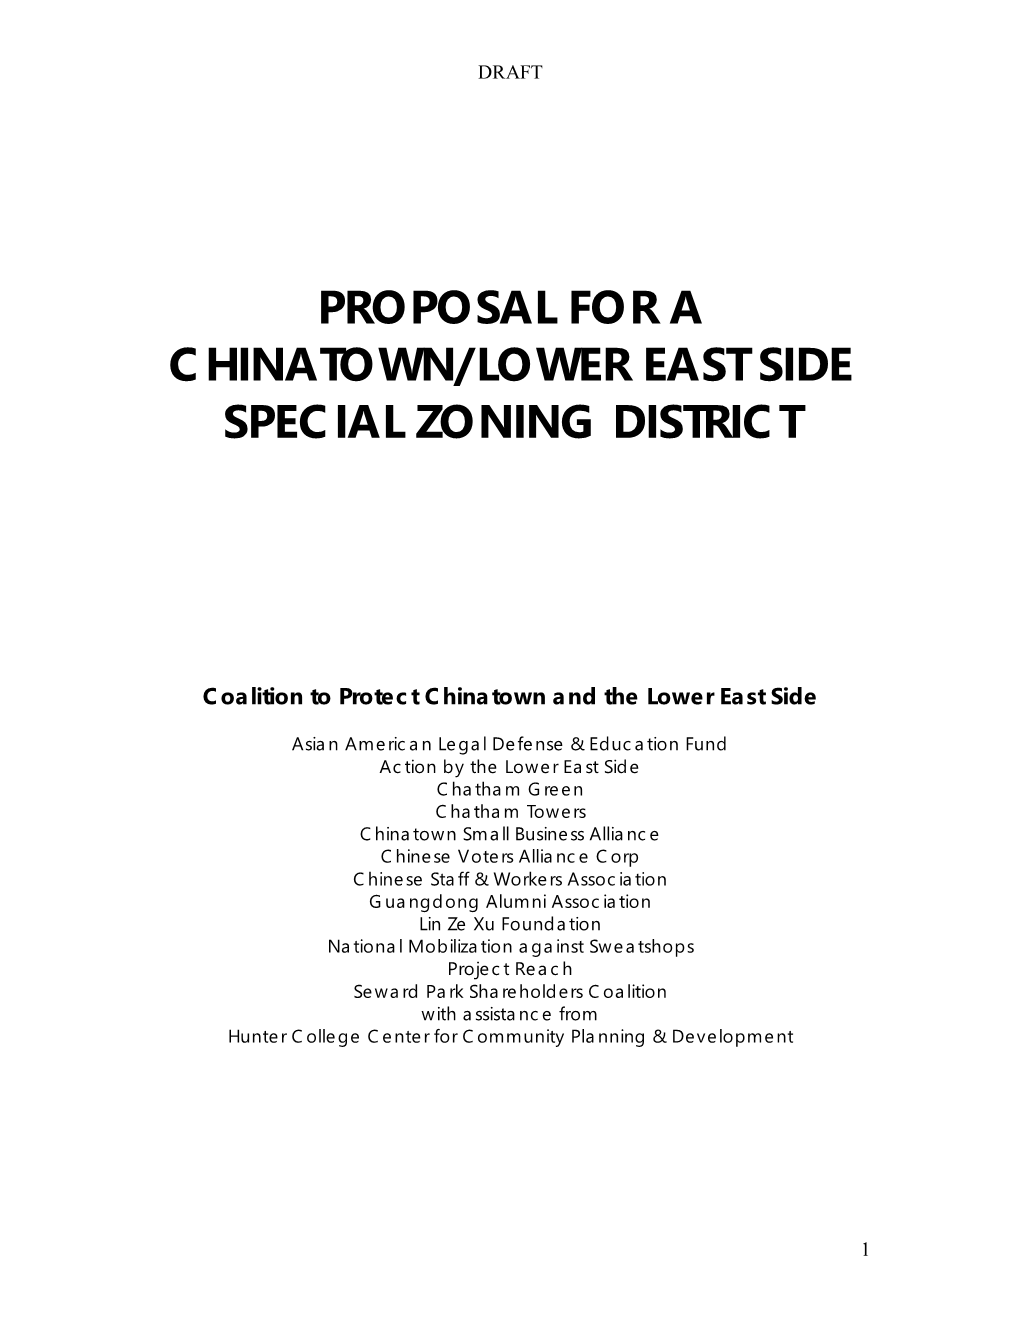 Proposal for a Chinatown/Lower East Side Special Zoning District